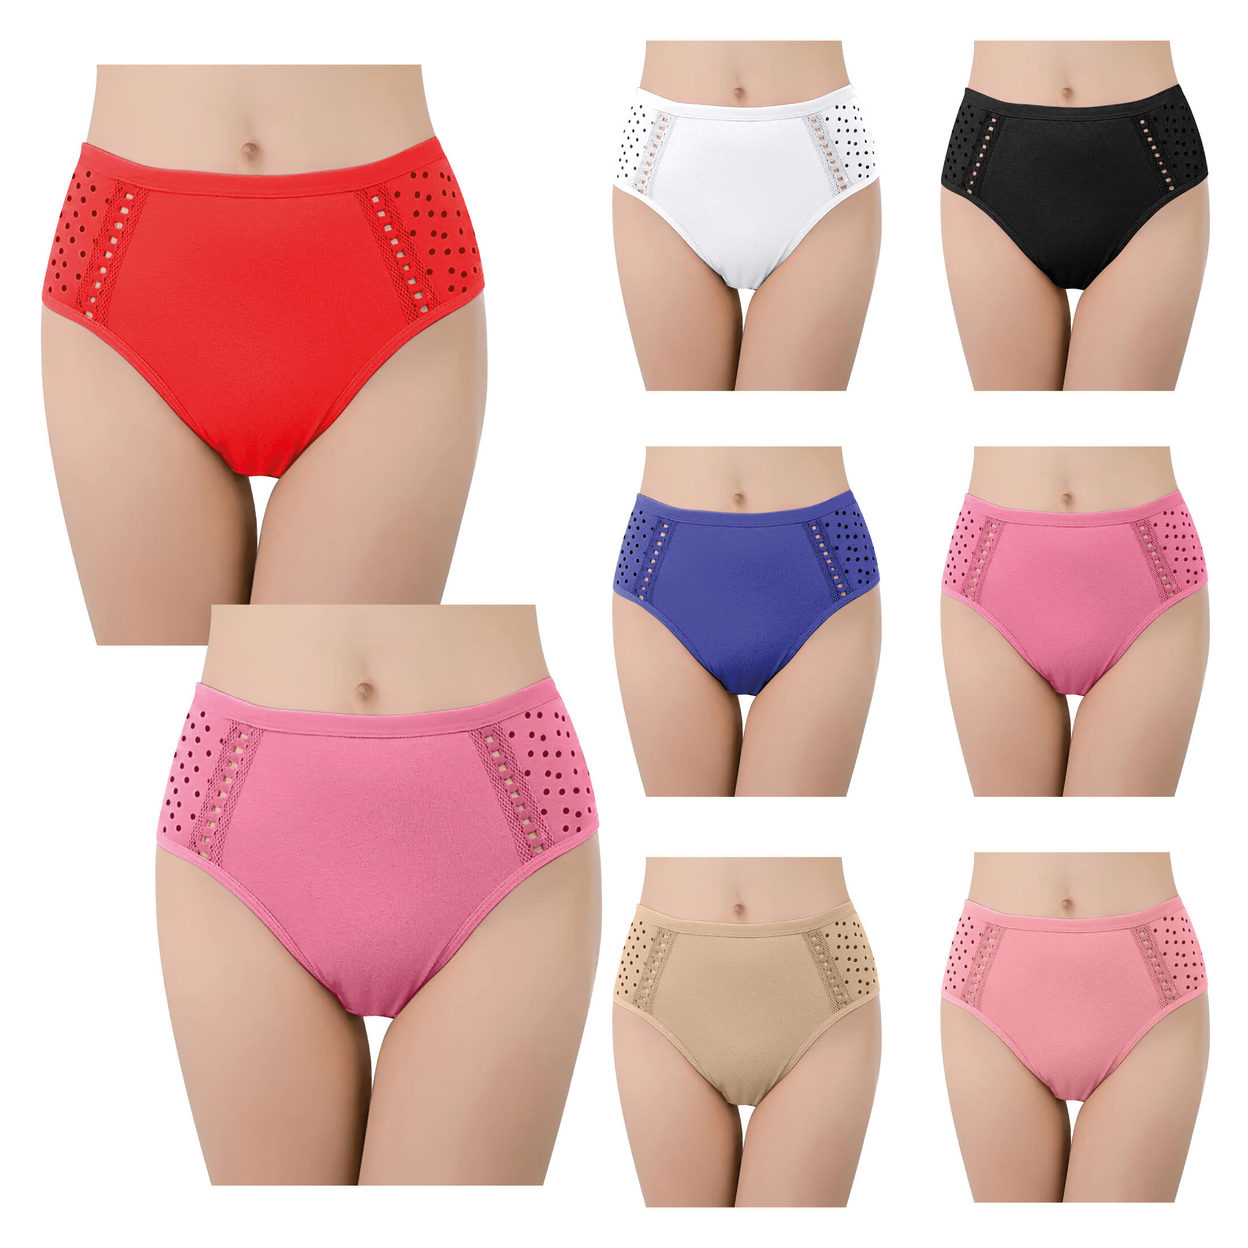 5-Pack: Women's Ultra Soft Moisture Wicking Panties Cotton Perfect Fit Underwear (Plus Sizes Available) - Medium